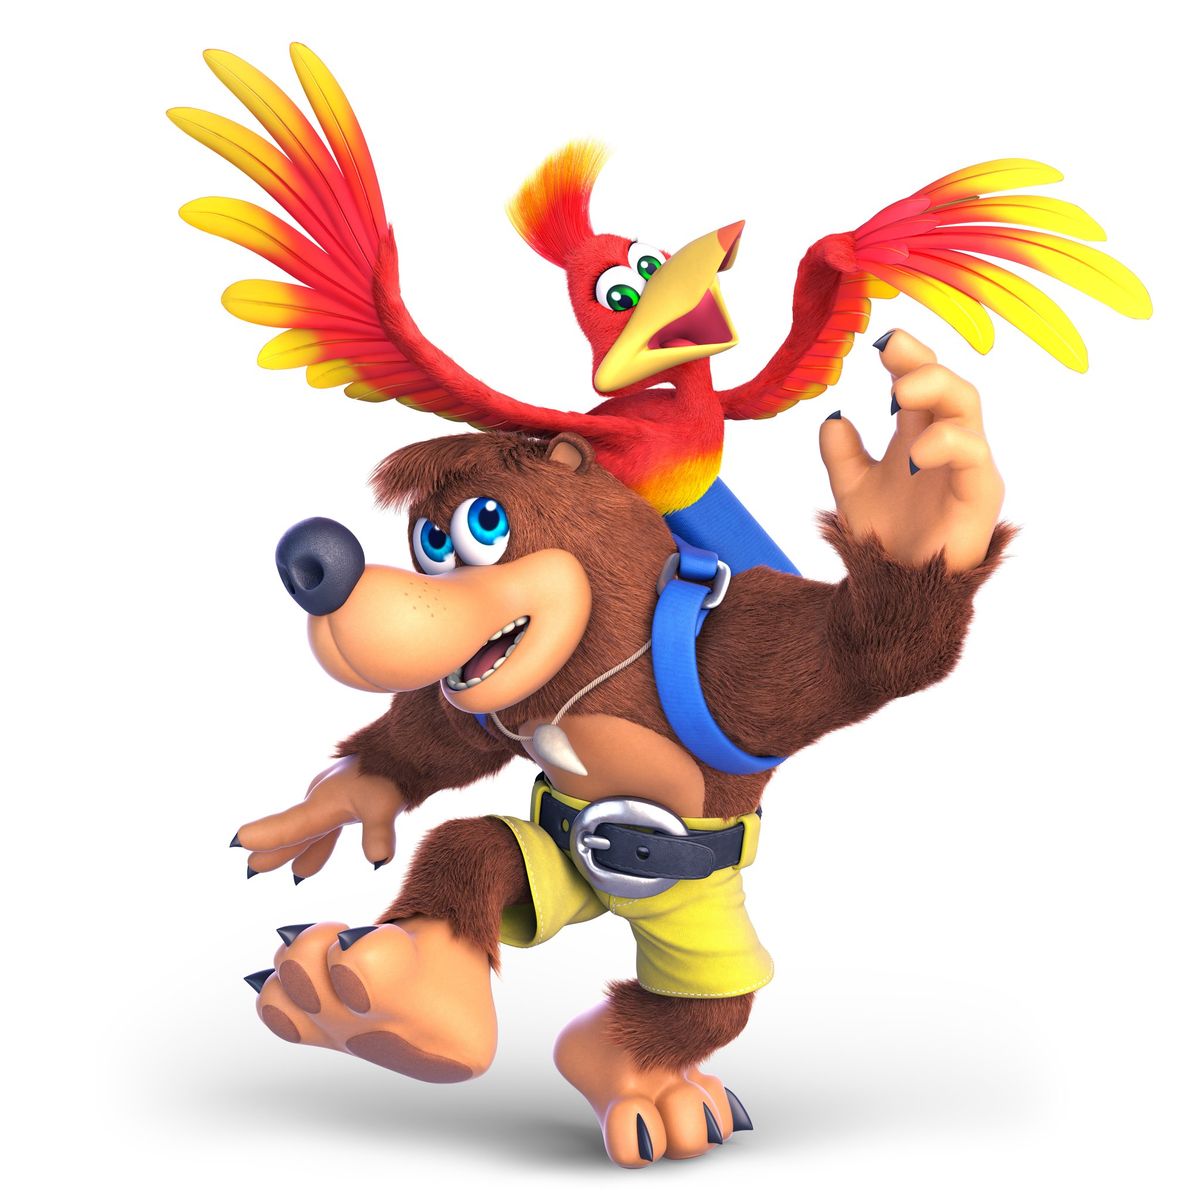 How to counter Banjo And Kazooie with Simon in Super Smash Bros. Ultimate